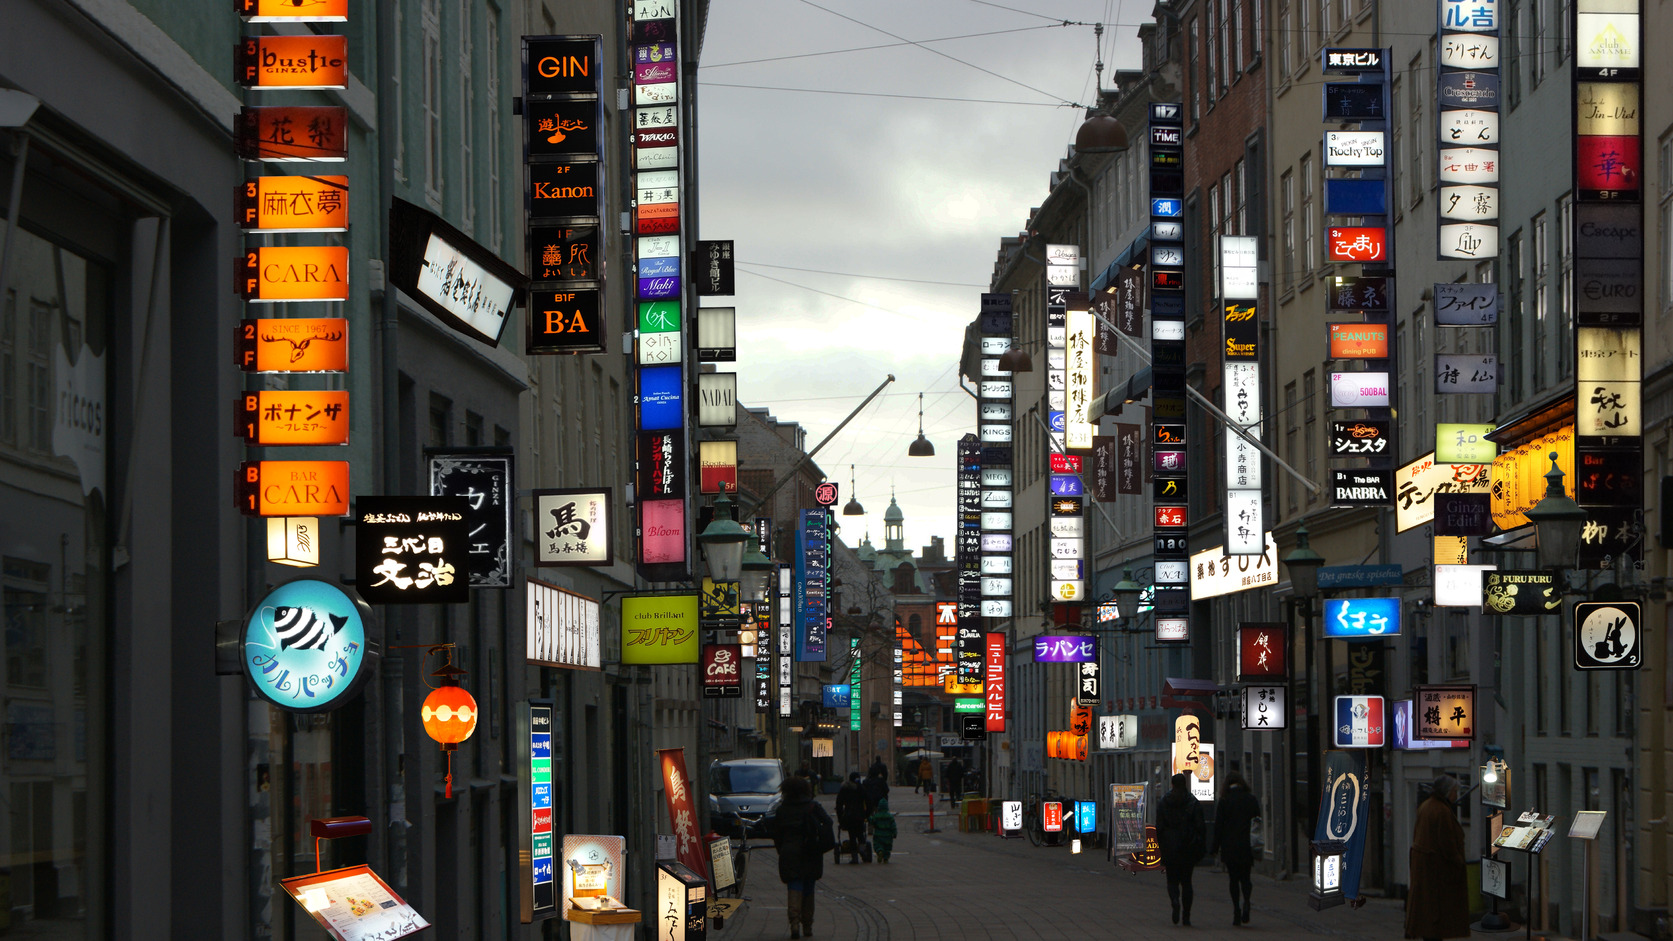 【Tokyo Weekender】The "Tokyo-lization" Project Gives 6 Global Cities a Tokyo Makeover | Arts